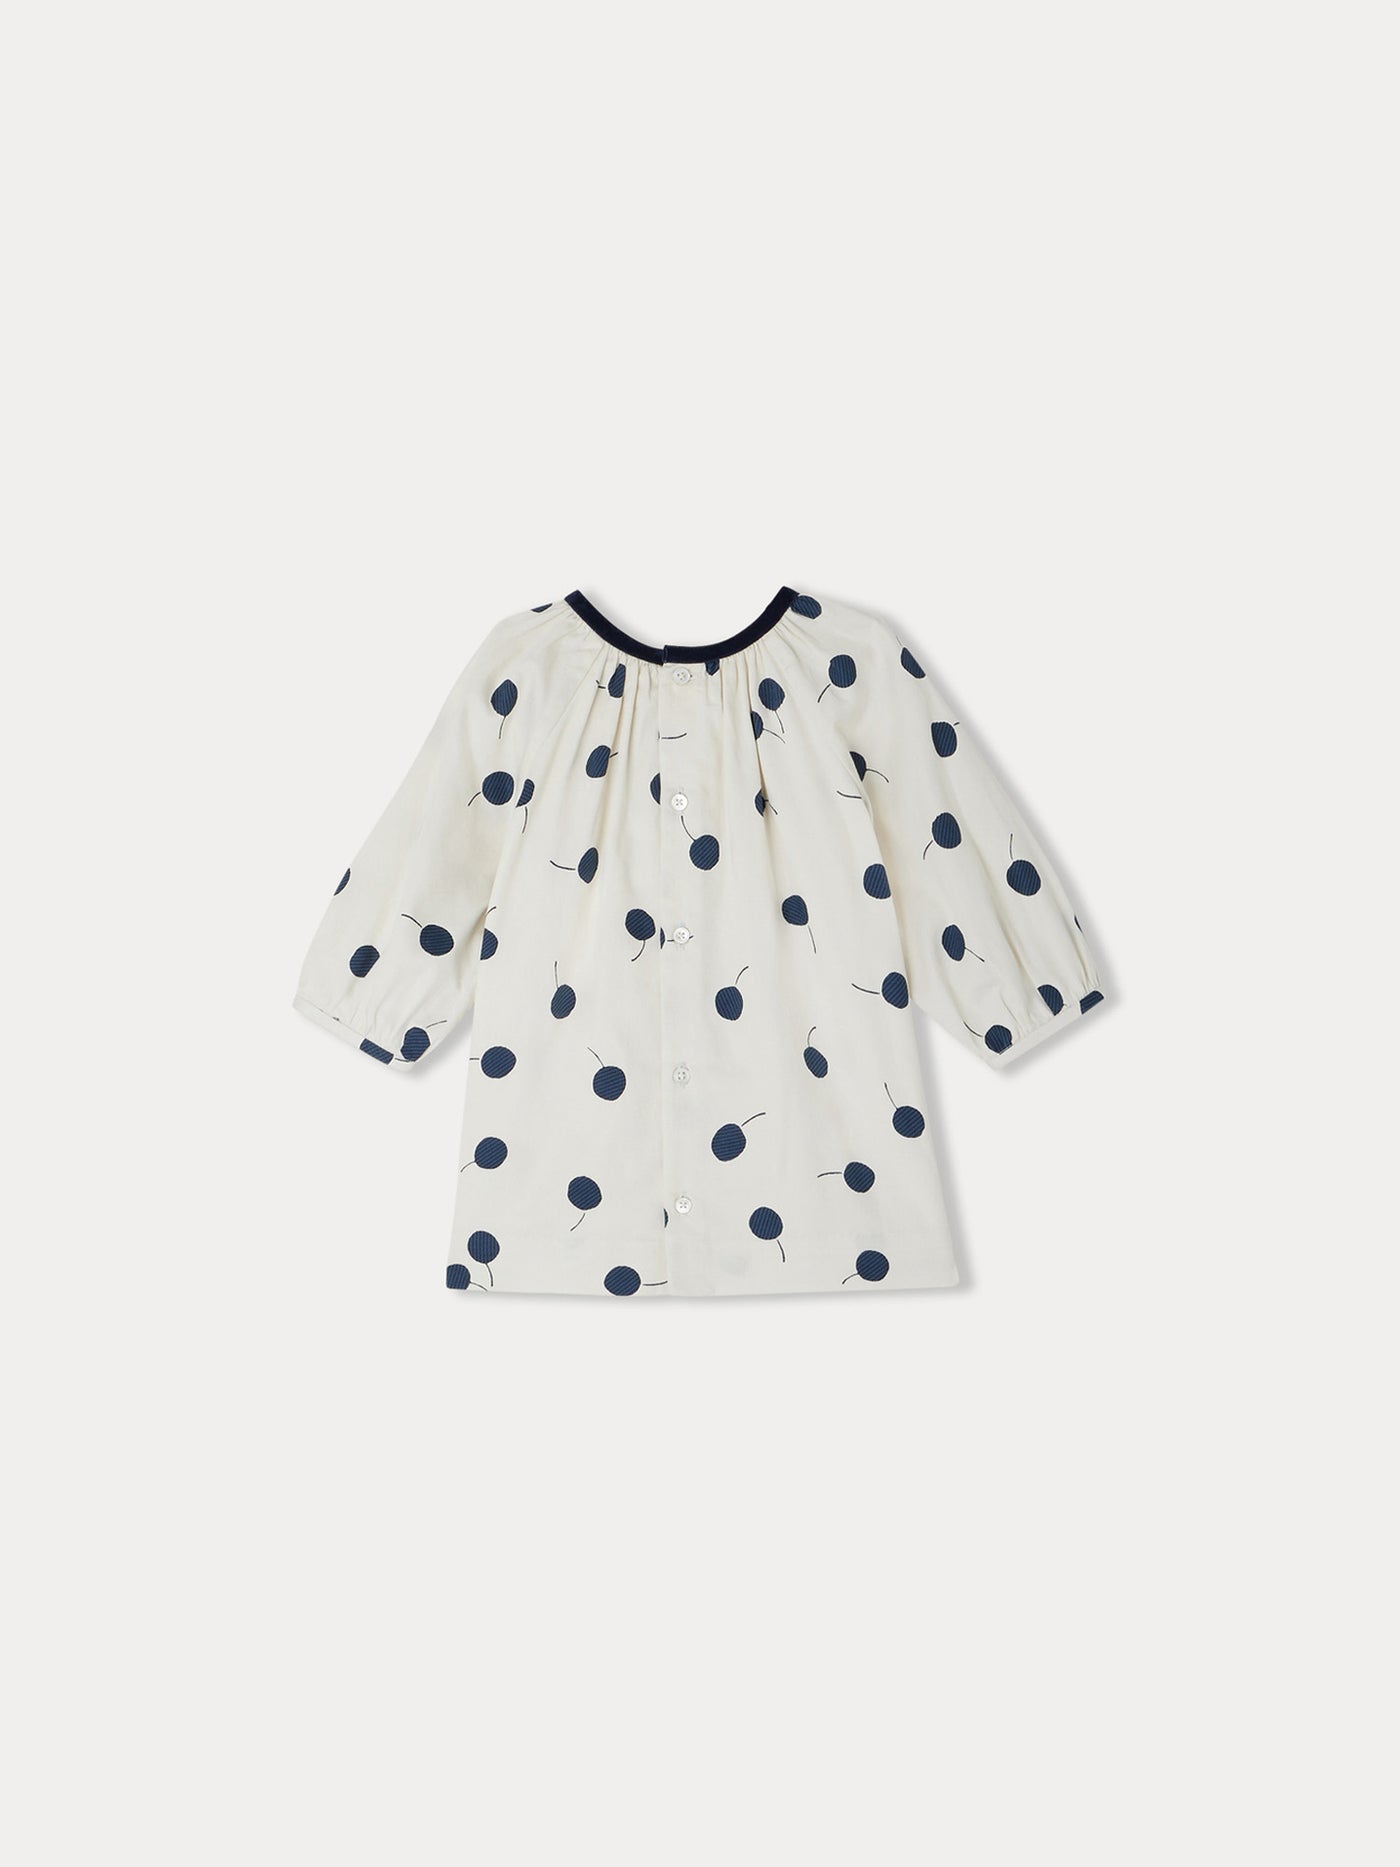 Gracielle babies' dress with cherry patterns